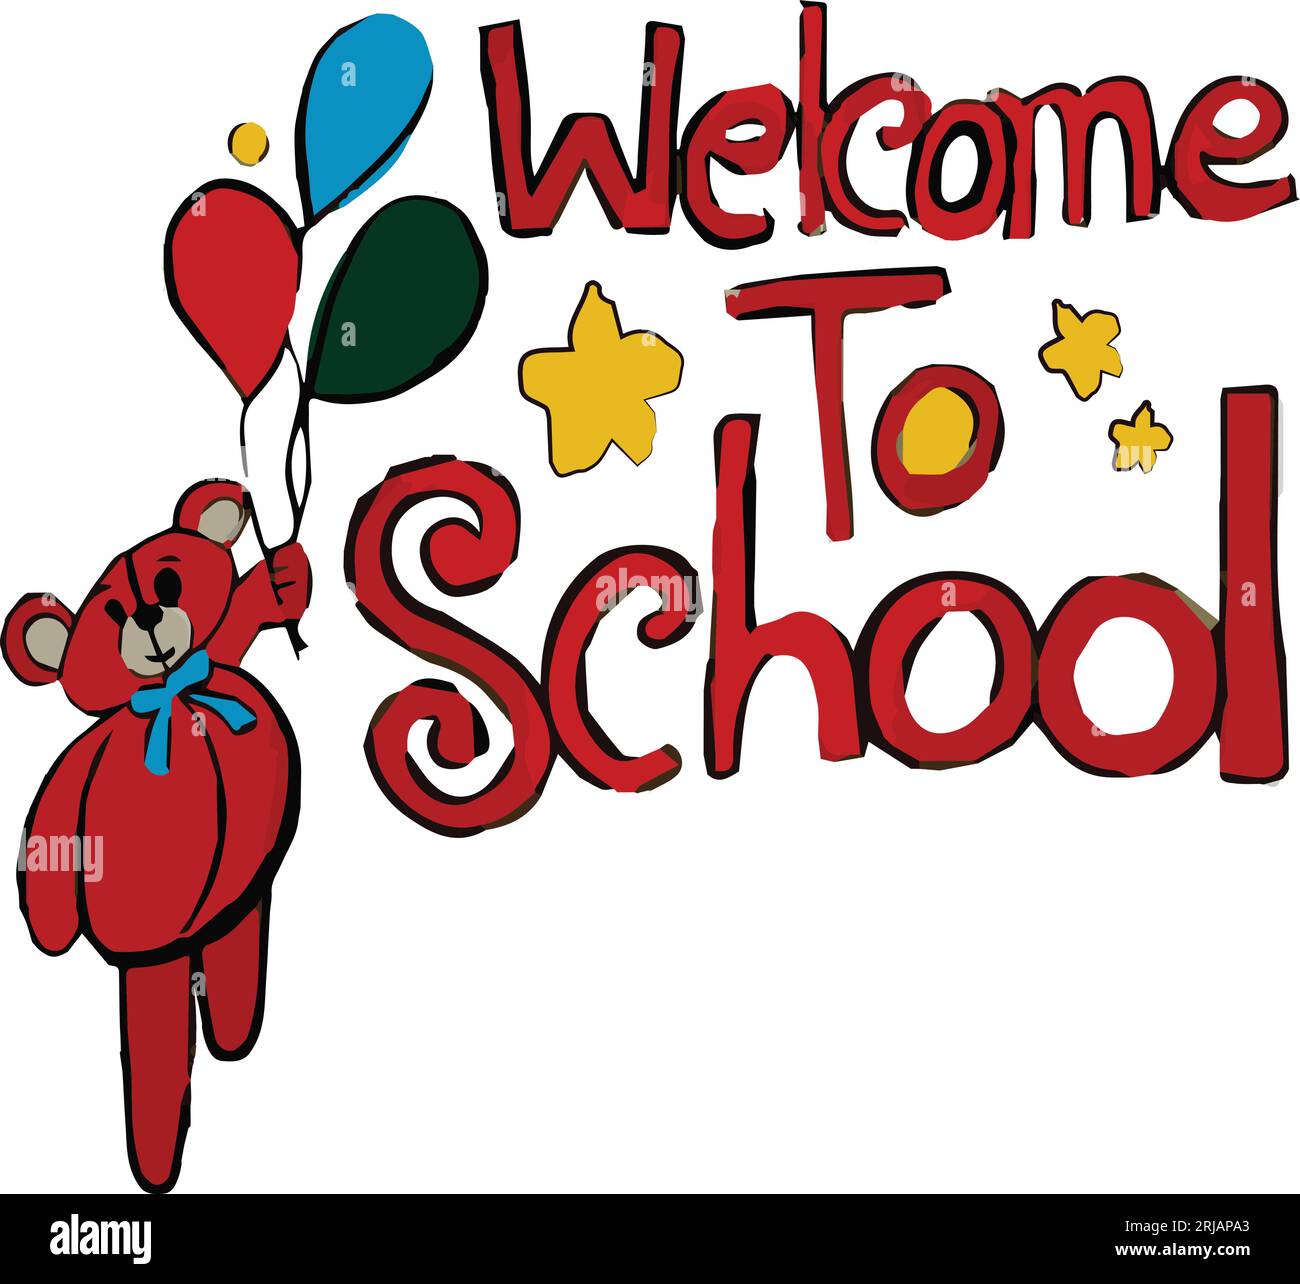 Hand drawn welcome to school Cartoon art with white background and creative design Stock Vector